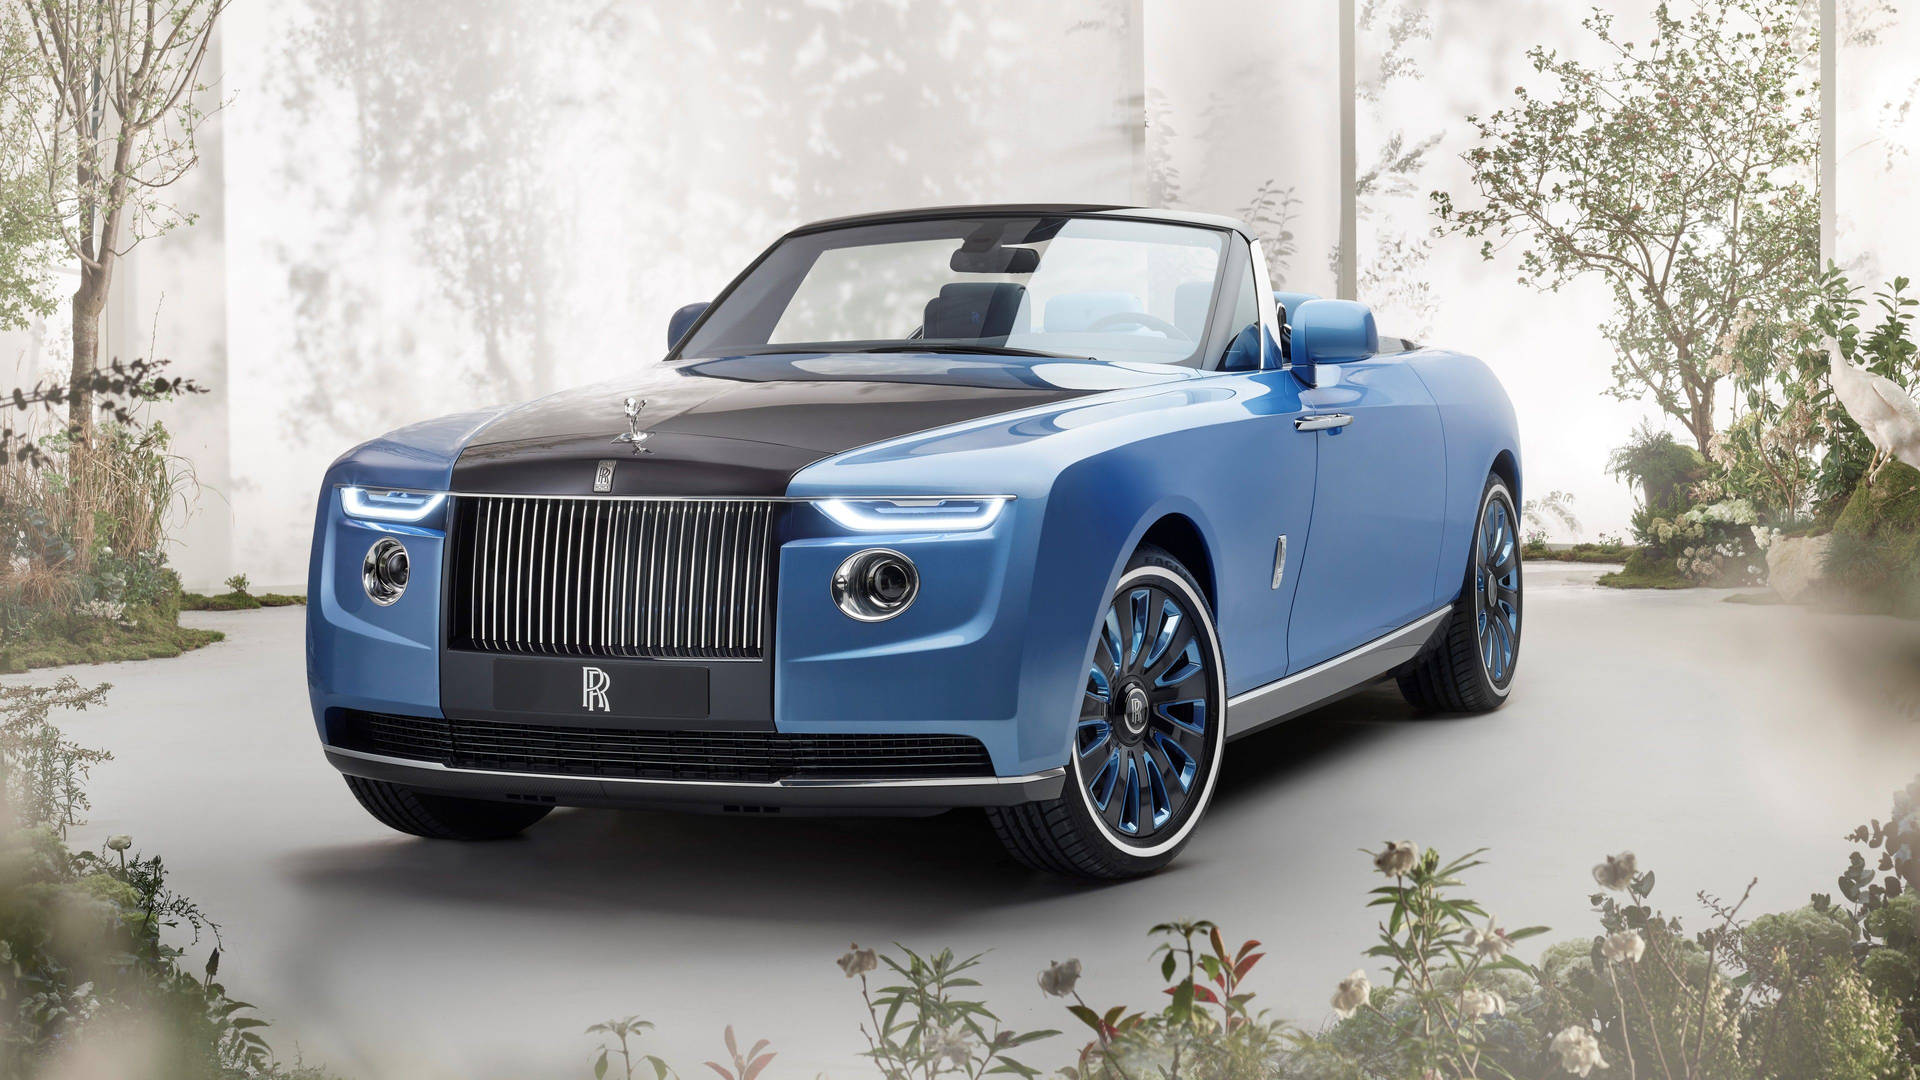 Rolls-Royce 4K Blue And Black Dawn With Shrubs Wallpaper